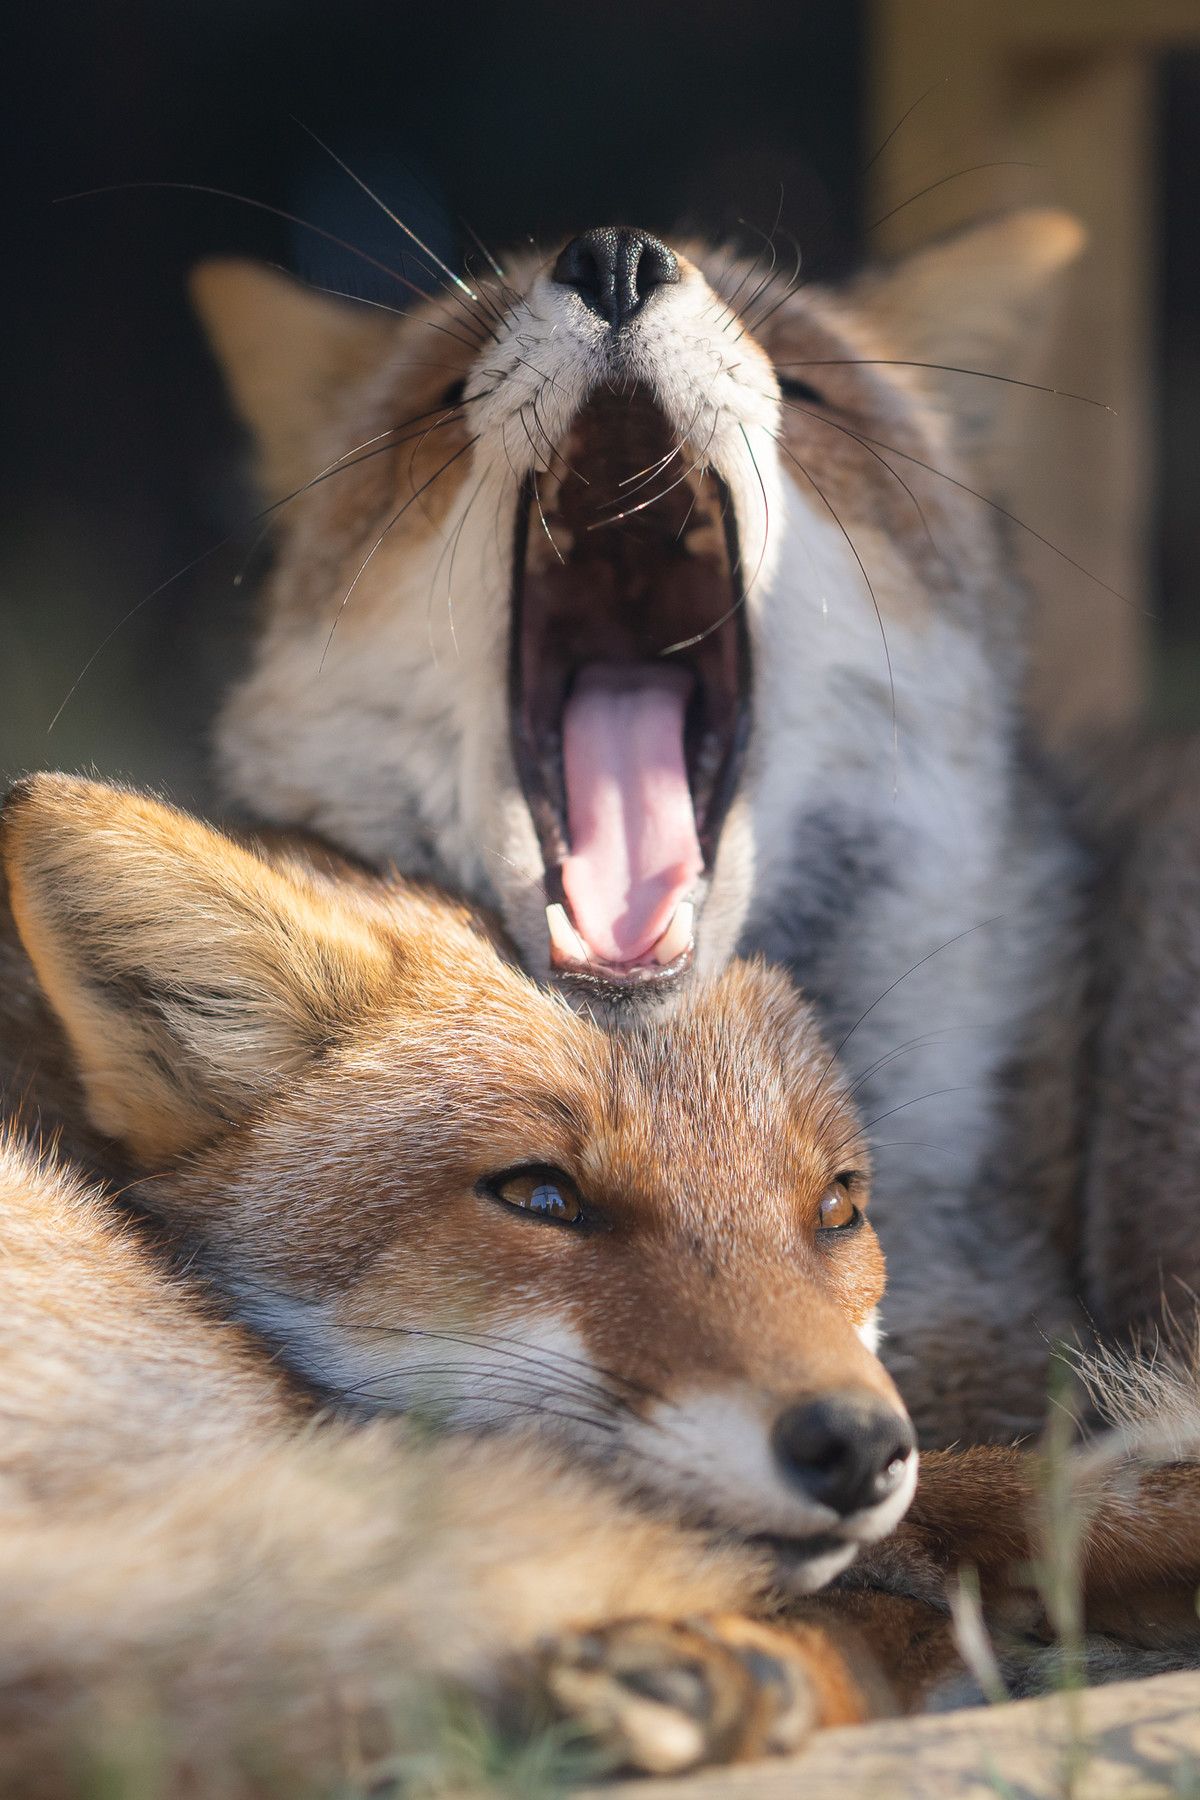 Yawn stack. .. the snooziest fox